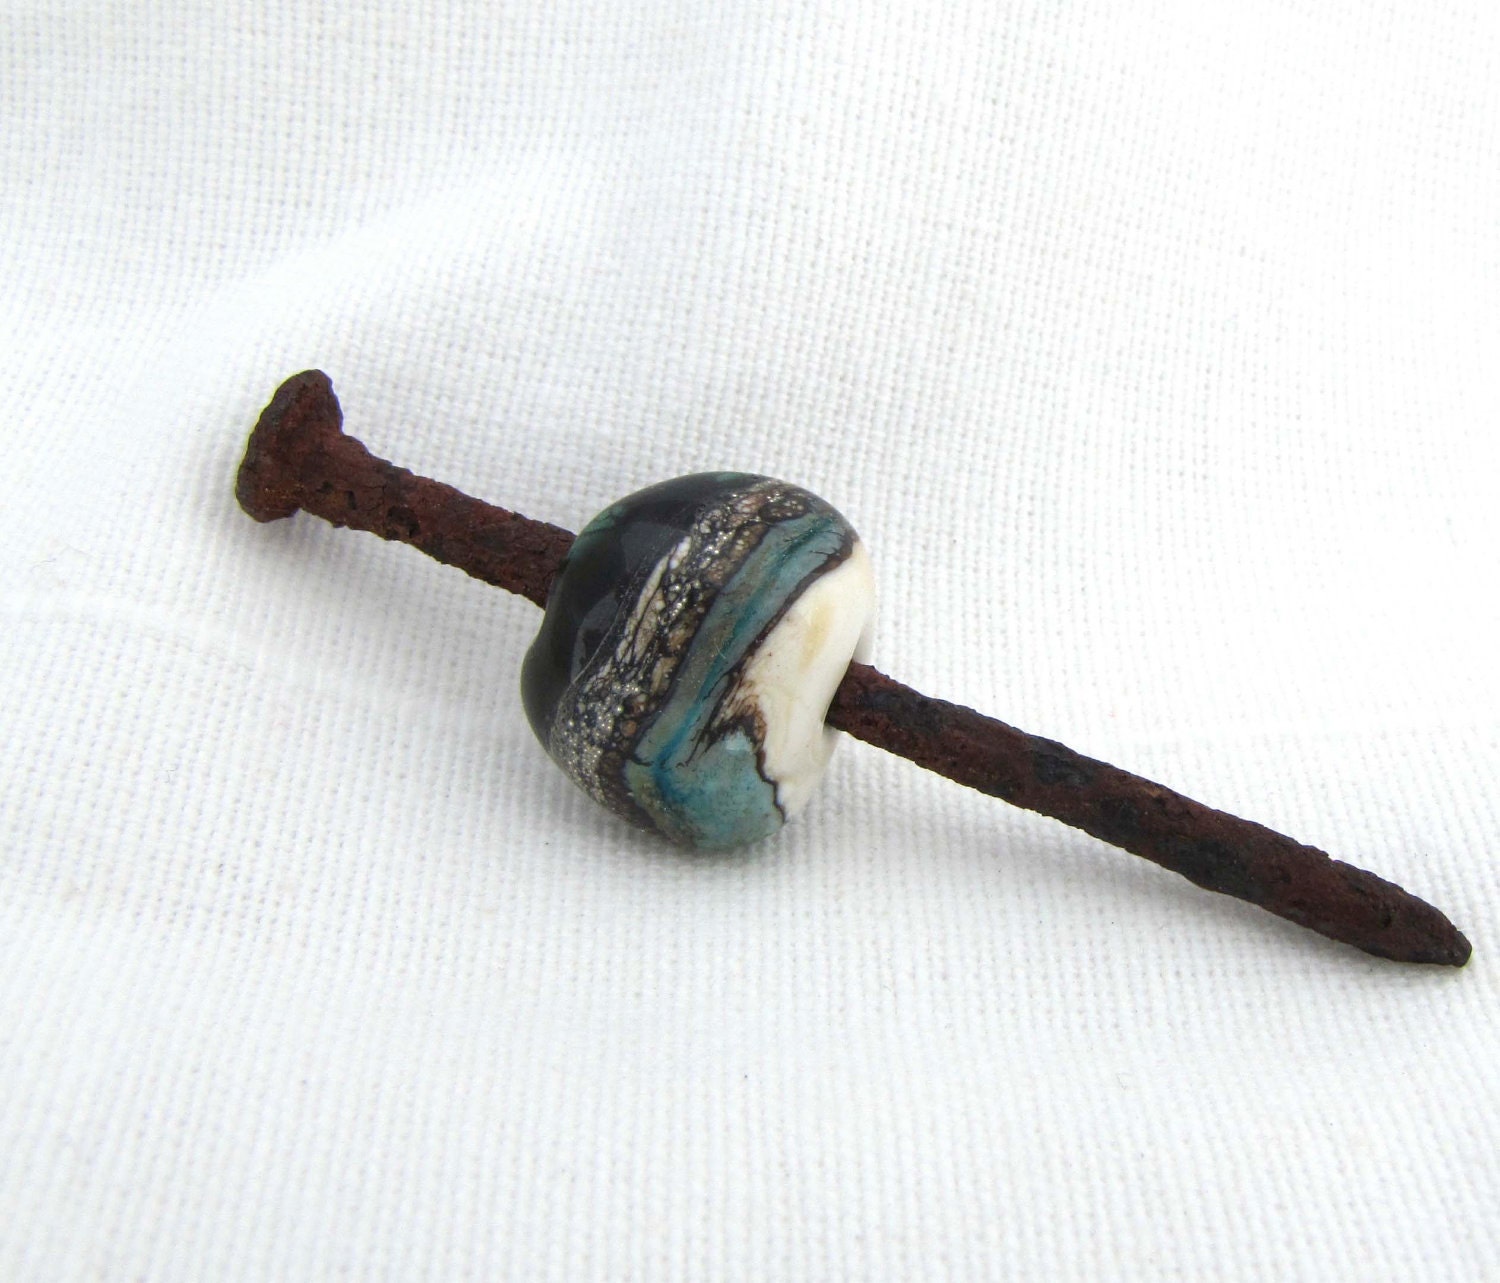 Found Object Rusty Nail Lampwork Altered Art  Pendant Piece Sedimentary  and Oceanic Turquoise Ivory and Shiny Metallics